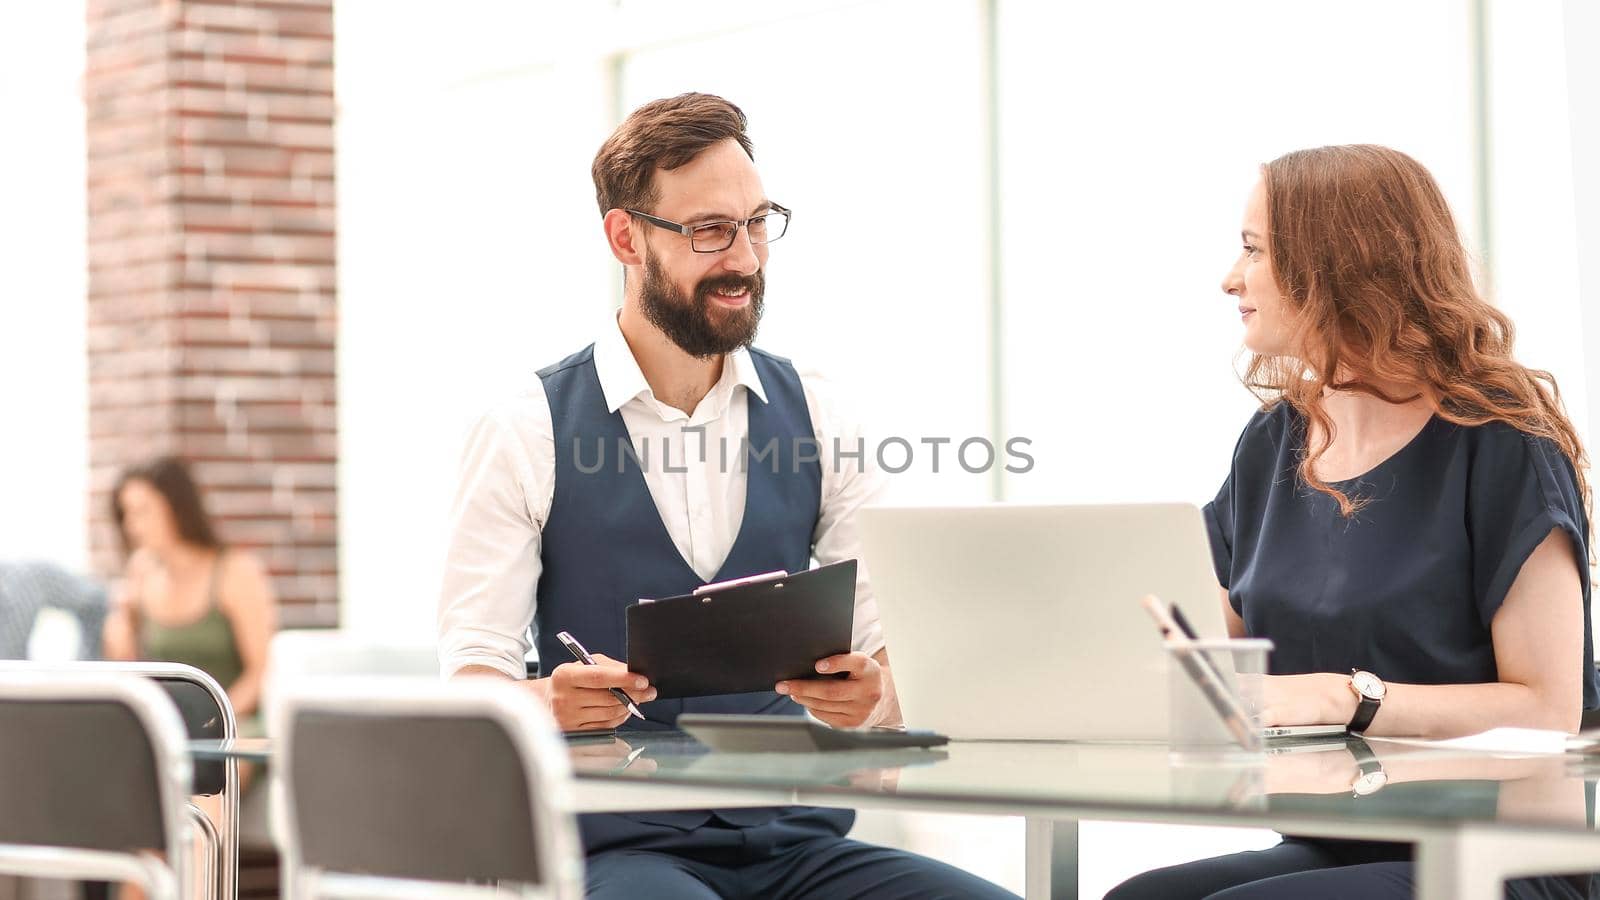 two employees discussing new ideas while sitting at the Desk.photo with copy space